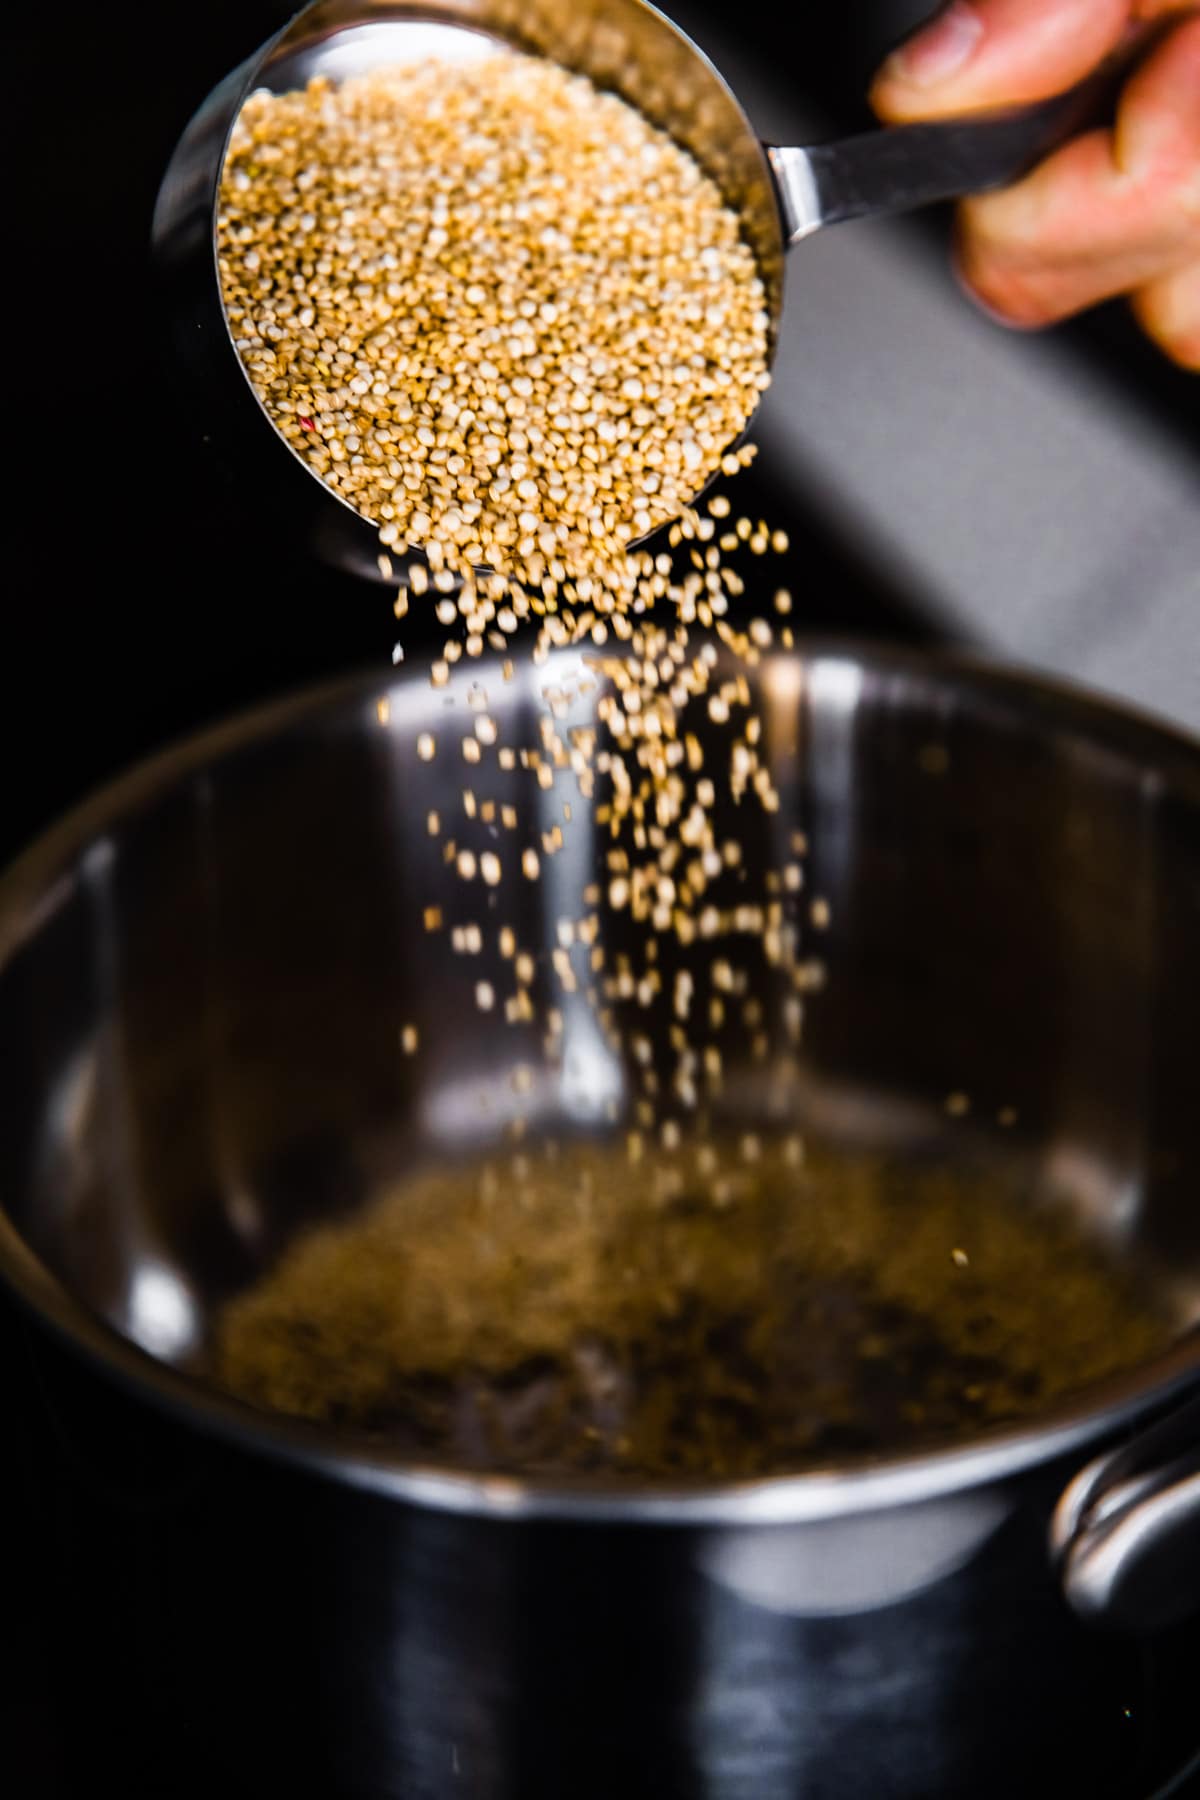 uncooked quinoa grains being poured into an instant pot